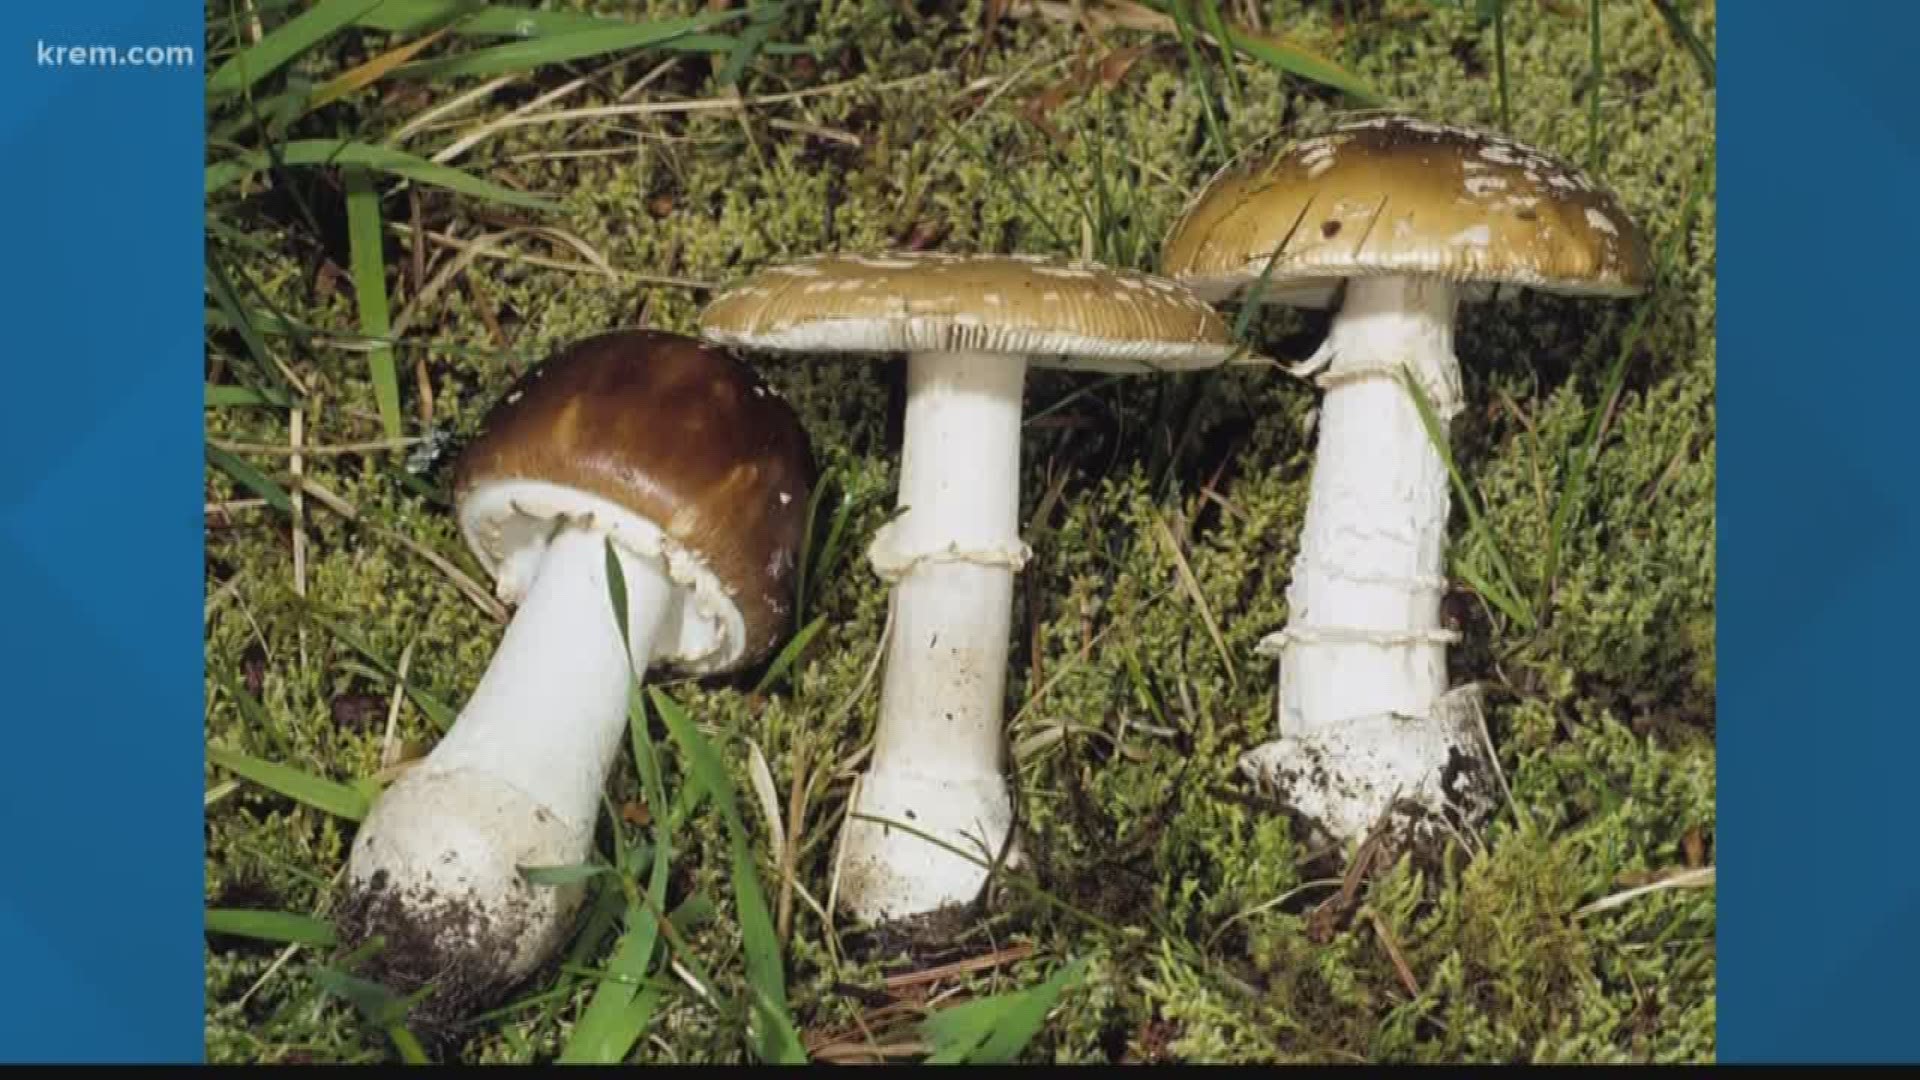 The North Idaho Mushroom Club received report about a man who was hospitalized after potentially eating a poisonous mushroom.